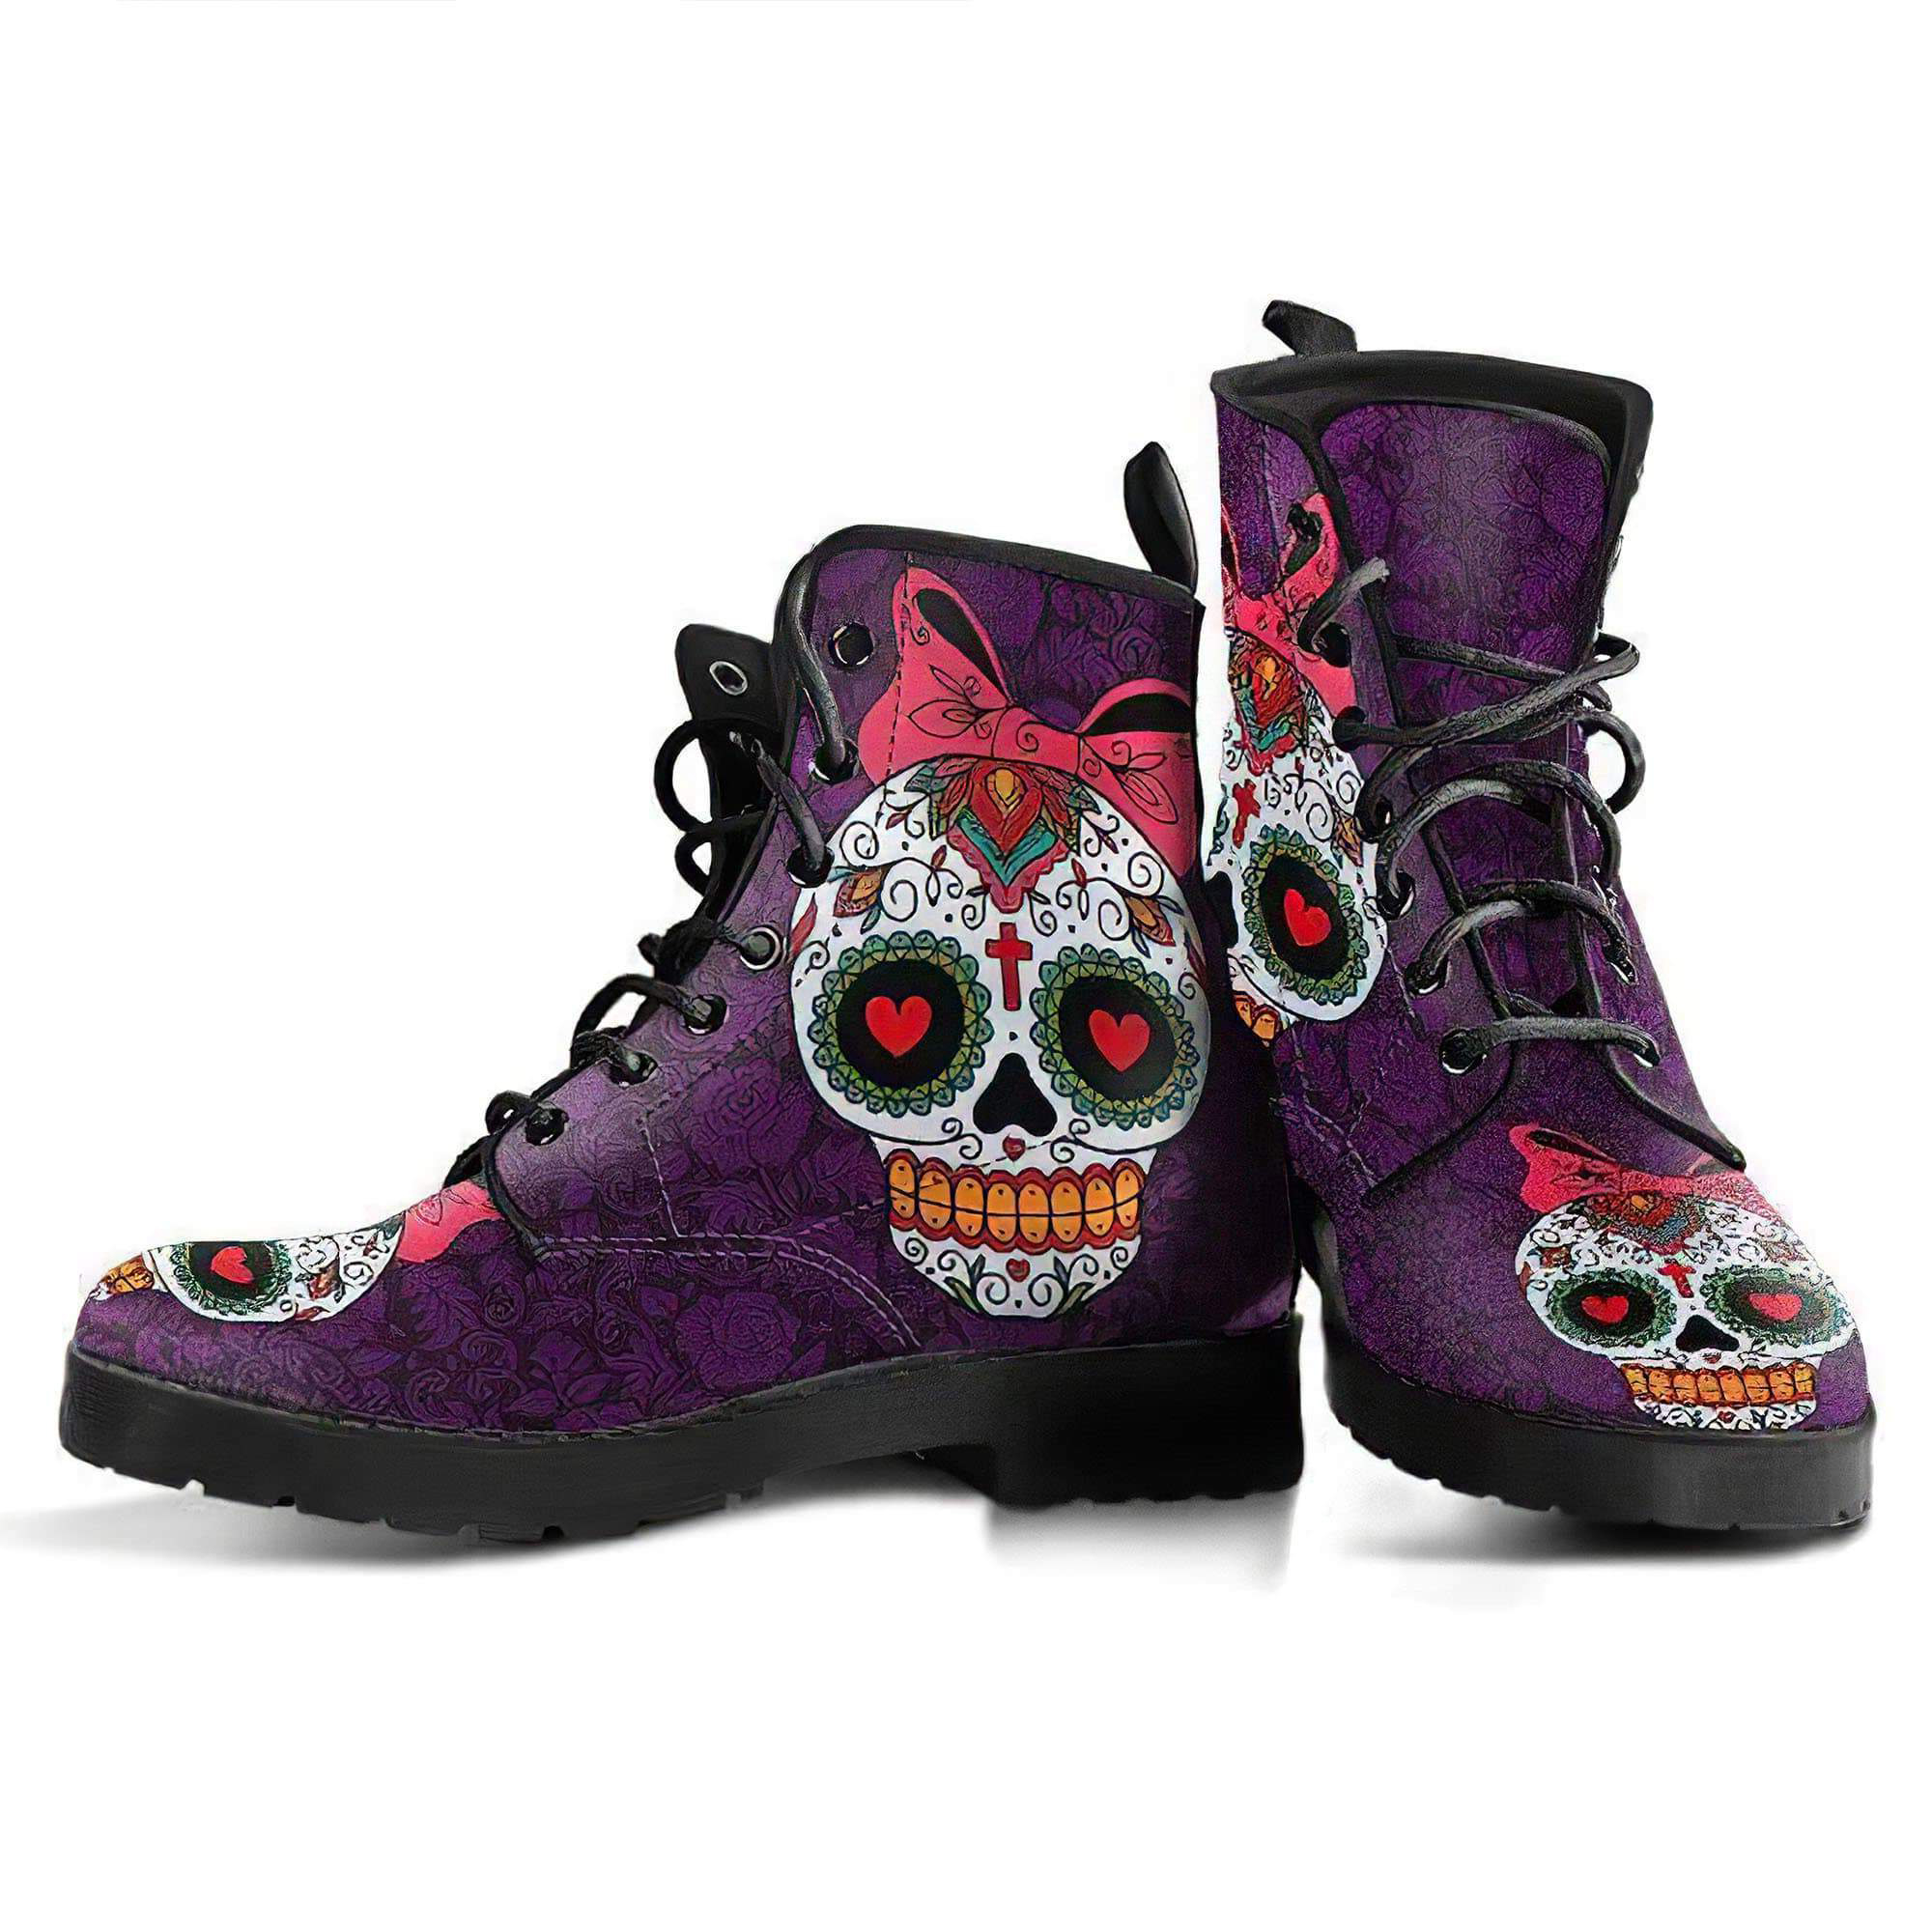 sugar-skull-women-s-leather-boots-women-s-leather-boots-12051956432957.jpg